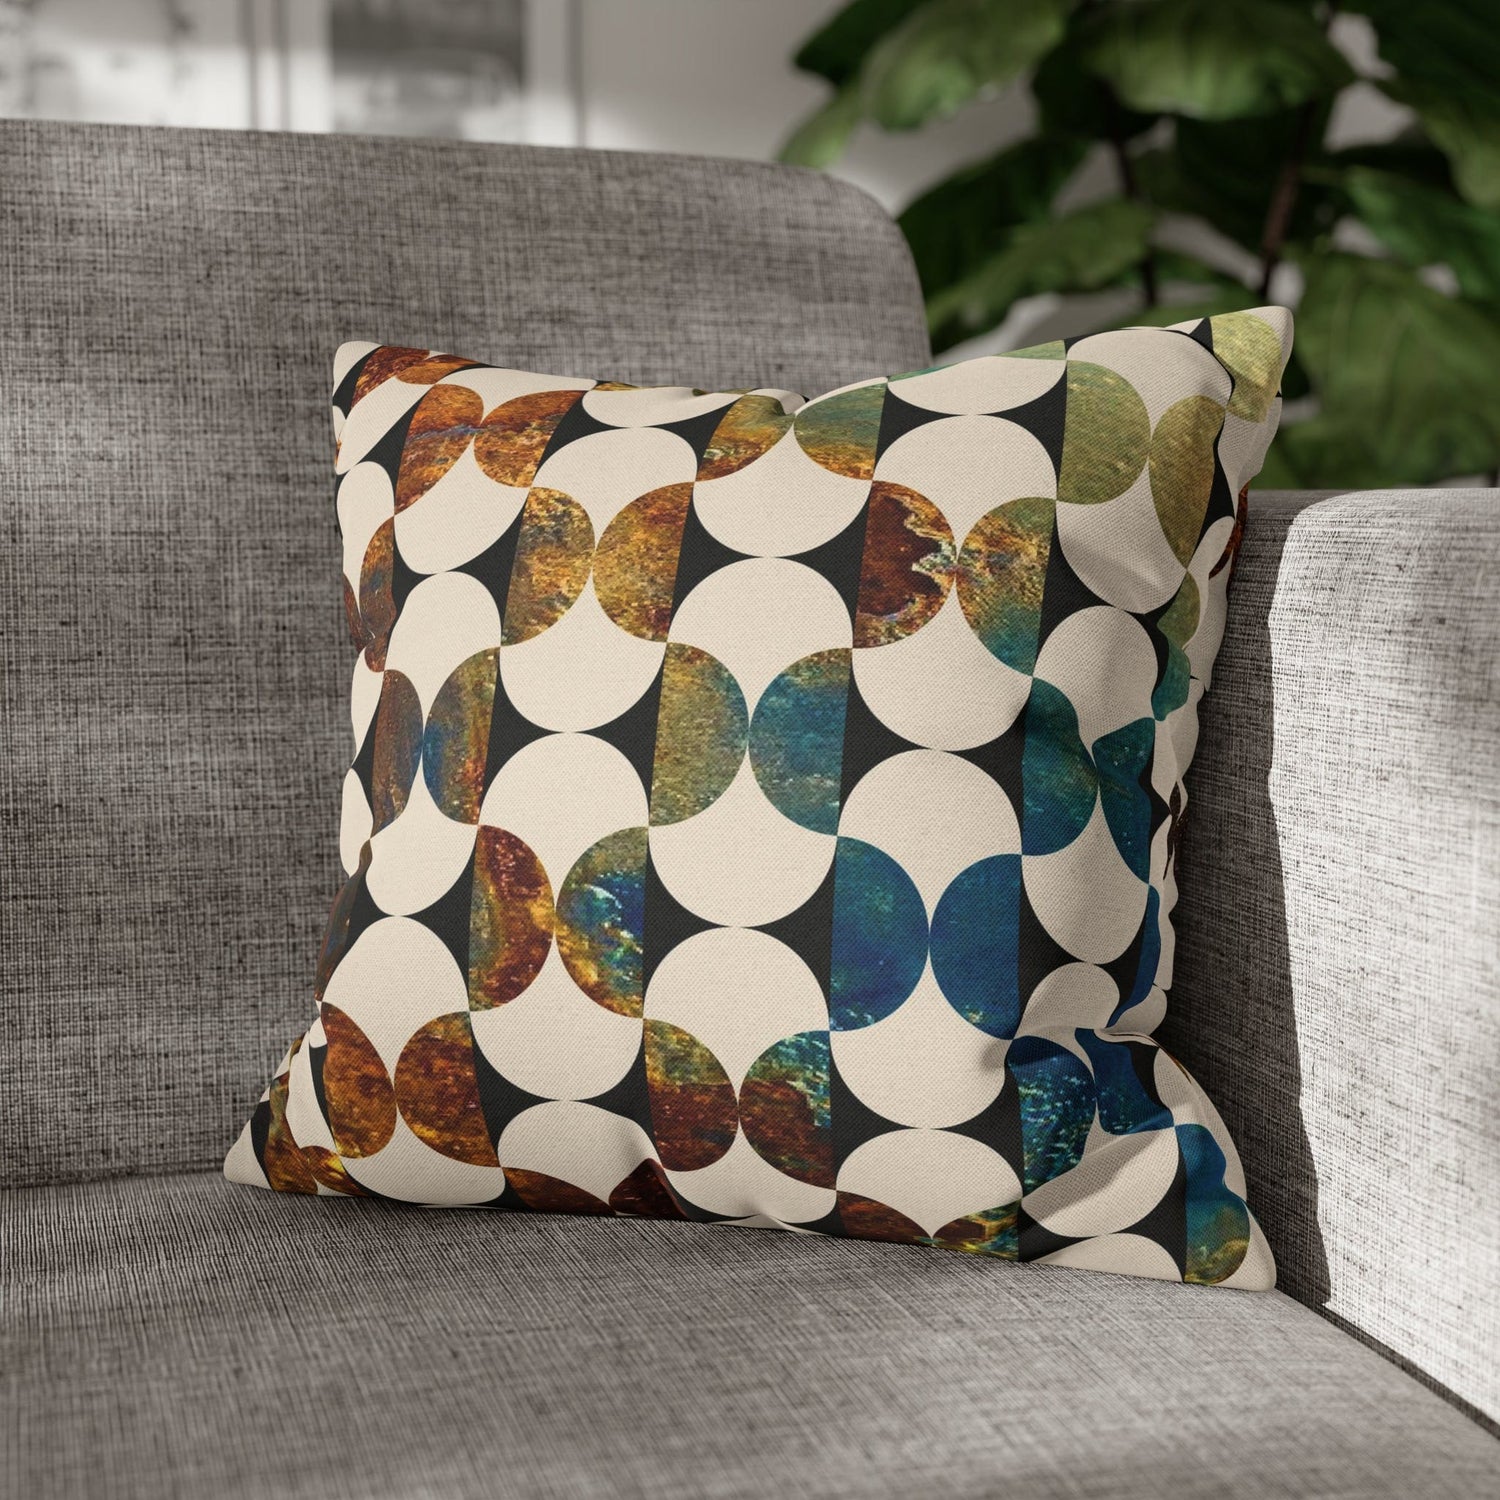 Kate McEnroe New York Mid Century Modern Geometric Abstract Throw Pillow Covers, Brown, Blue, Beige, 50s Retro Living Room, Bedroom Cushion Covers Throw Pillow Covers 16&quot; × 16&quot; 13567590563798508477